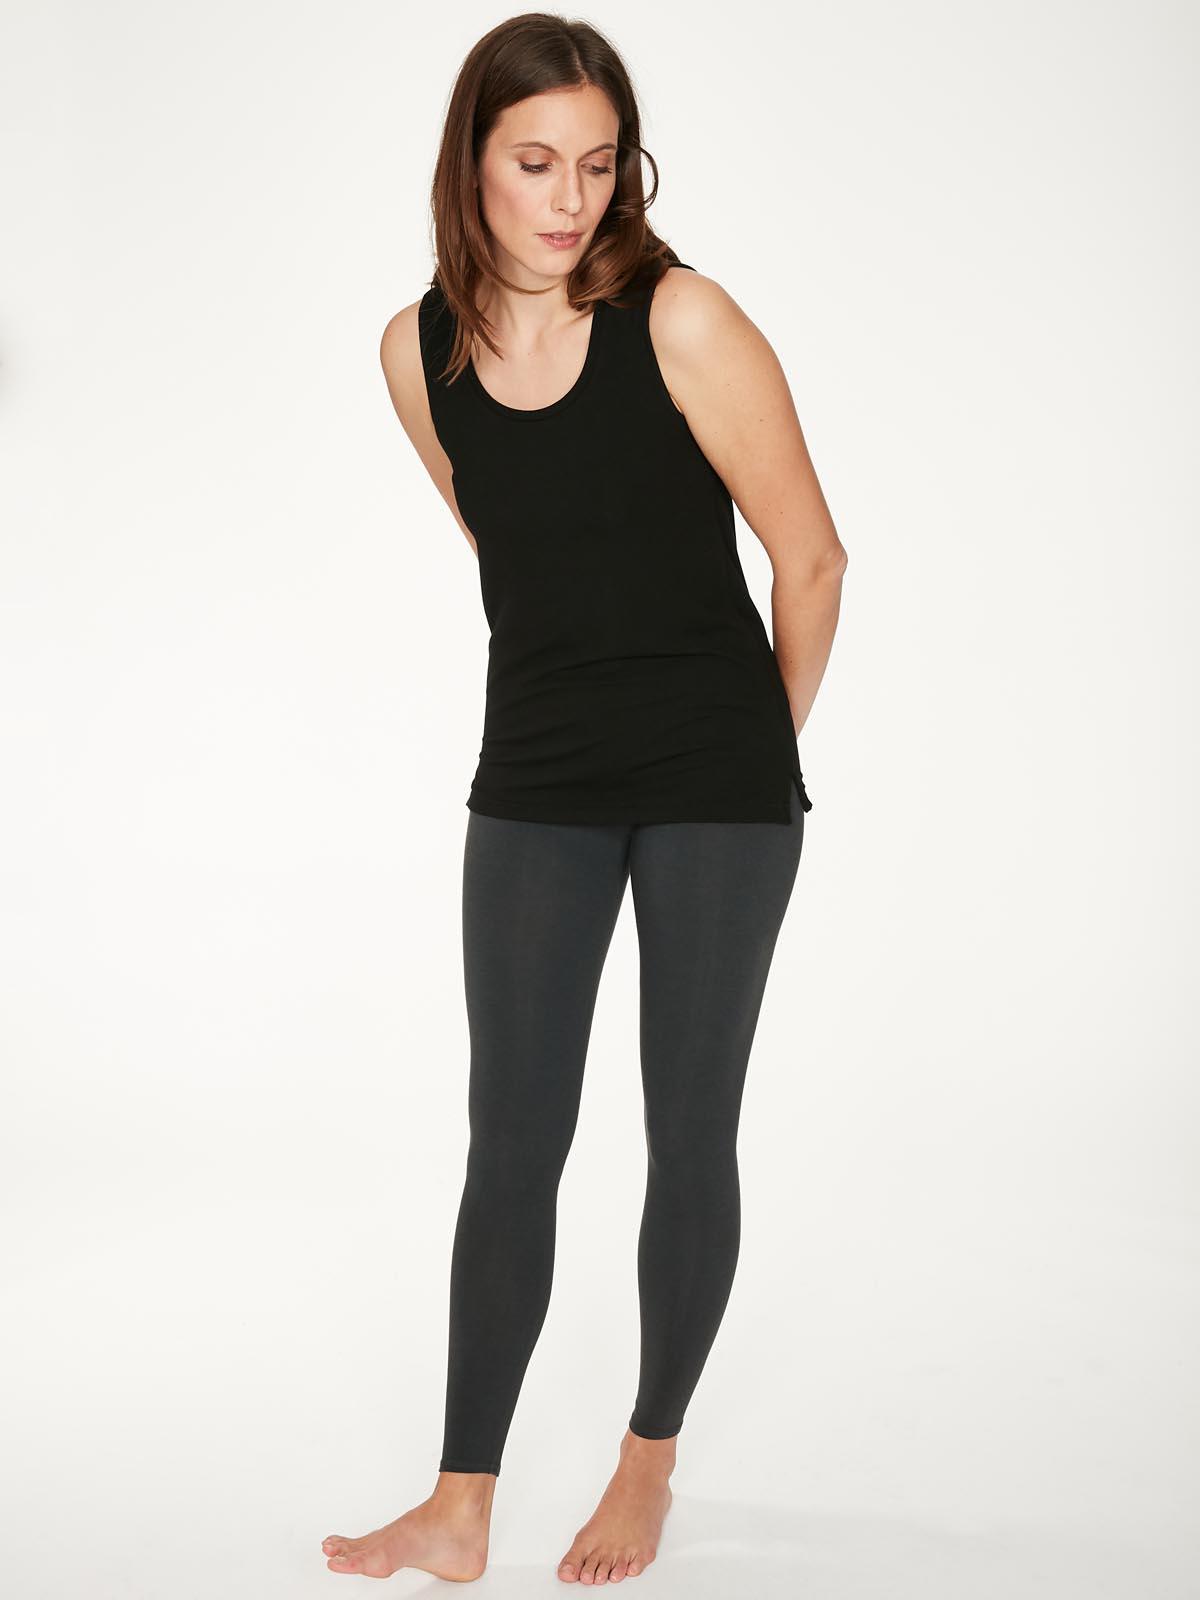 The Bamboo Base Layer Leggings in Pewter Grey